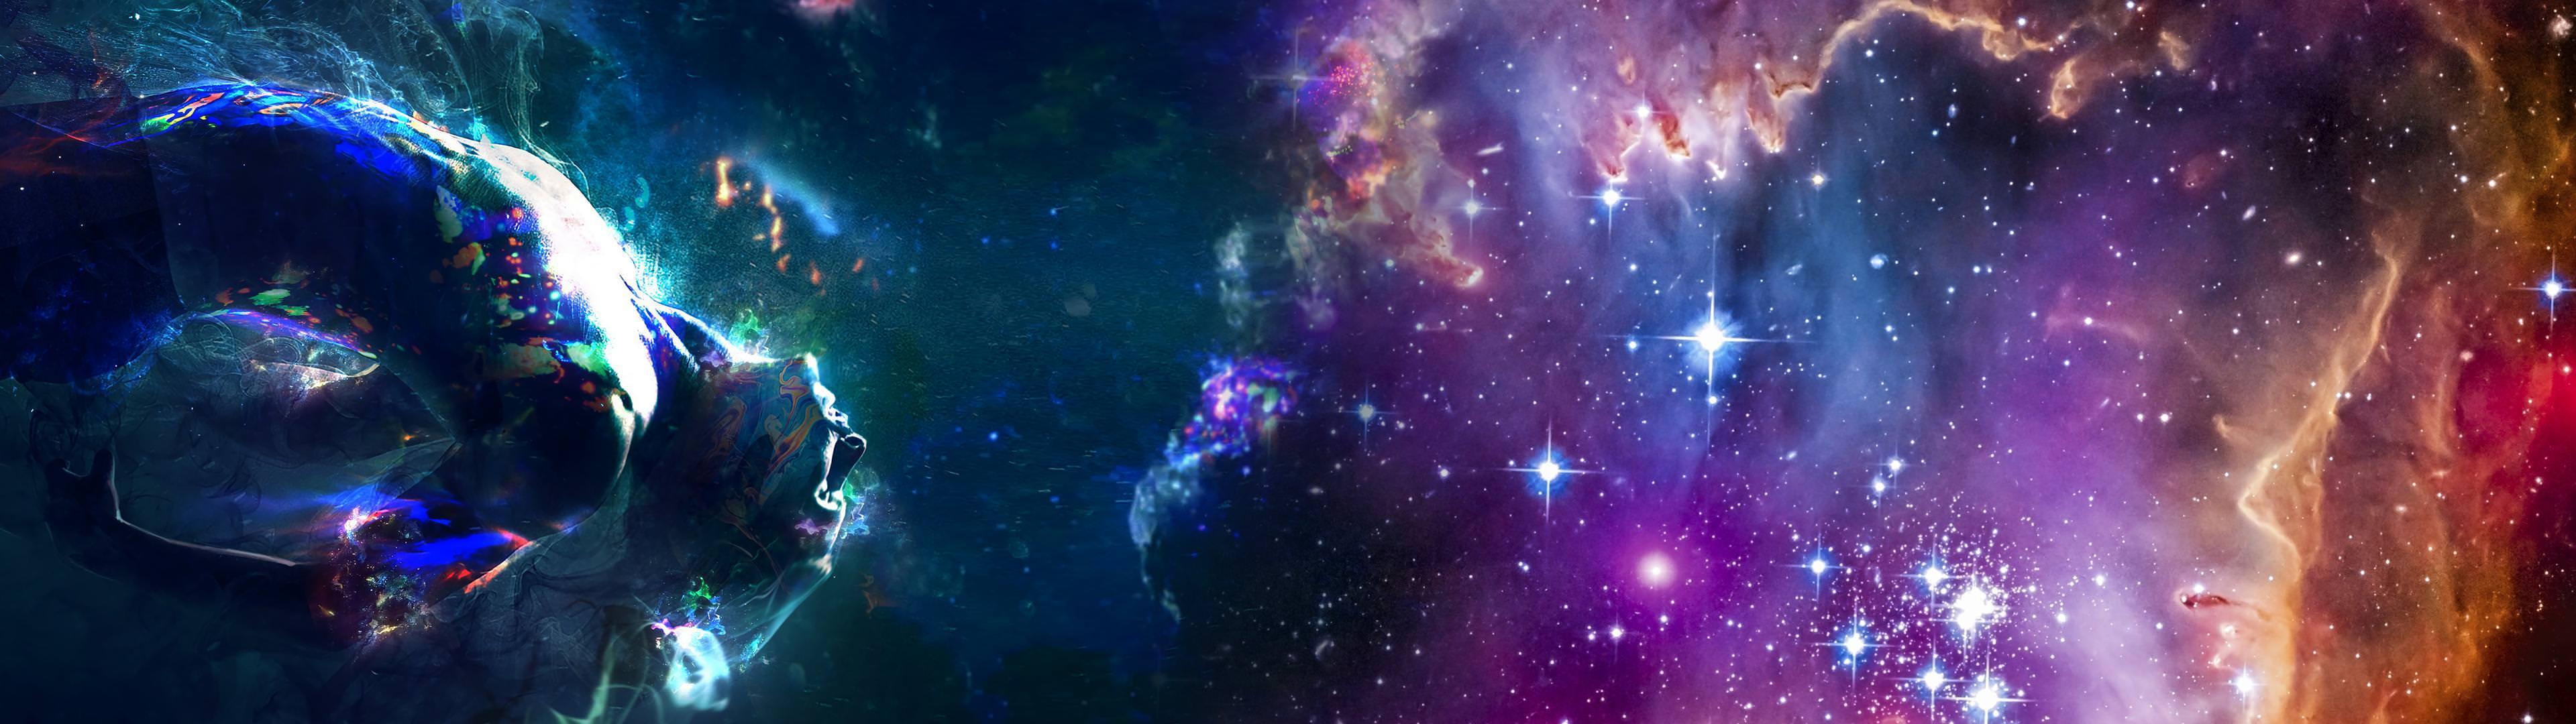 Galaxy Dual Monitor Wallpaper 3840x1080 Hot Sex Picture